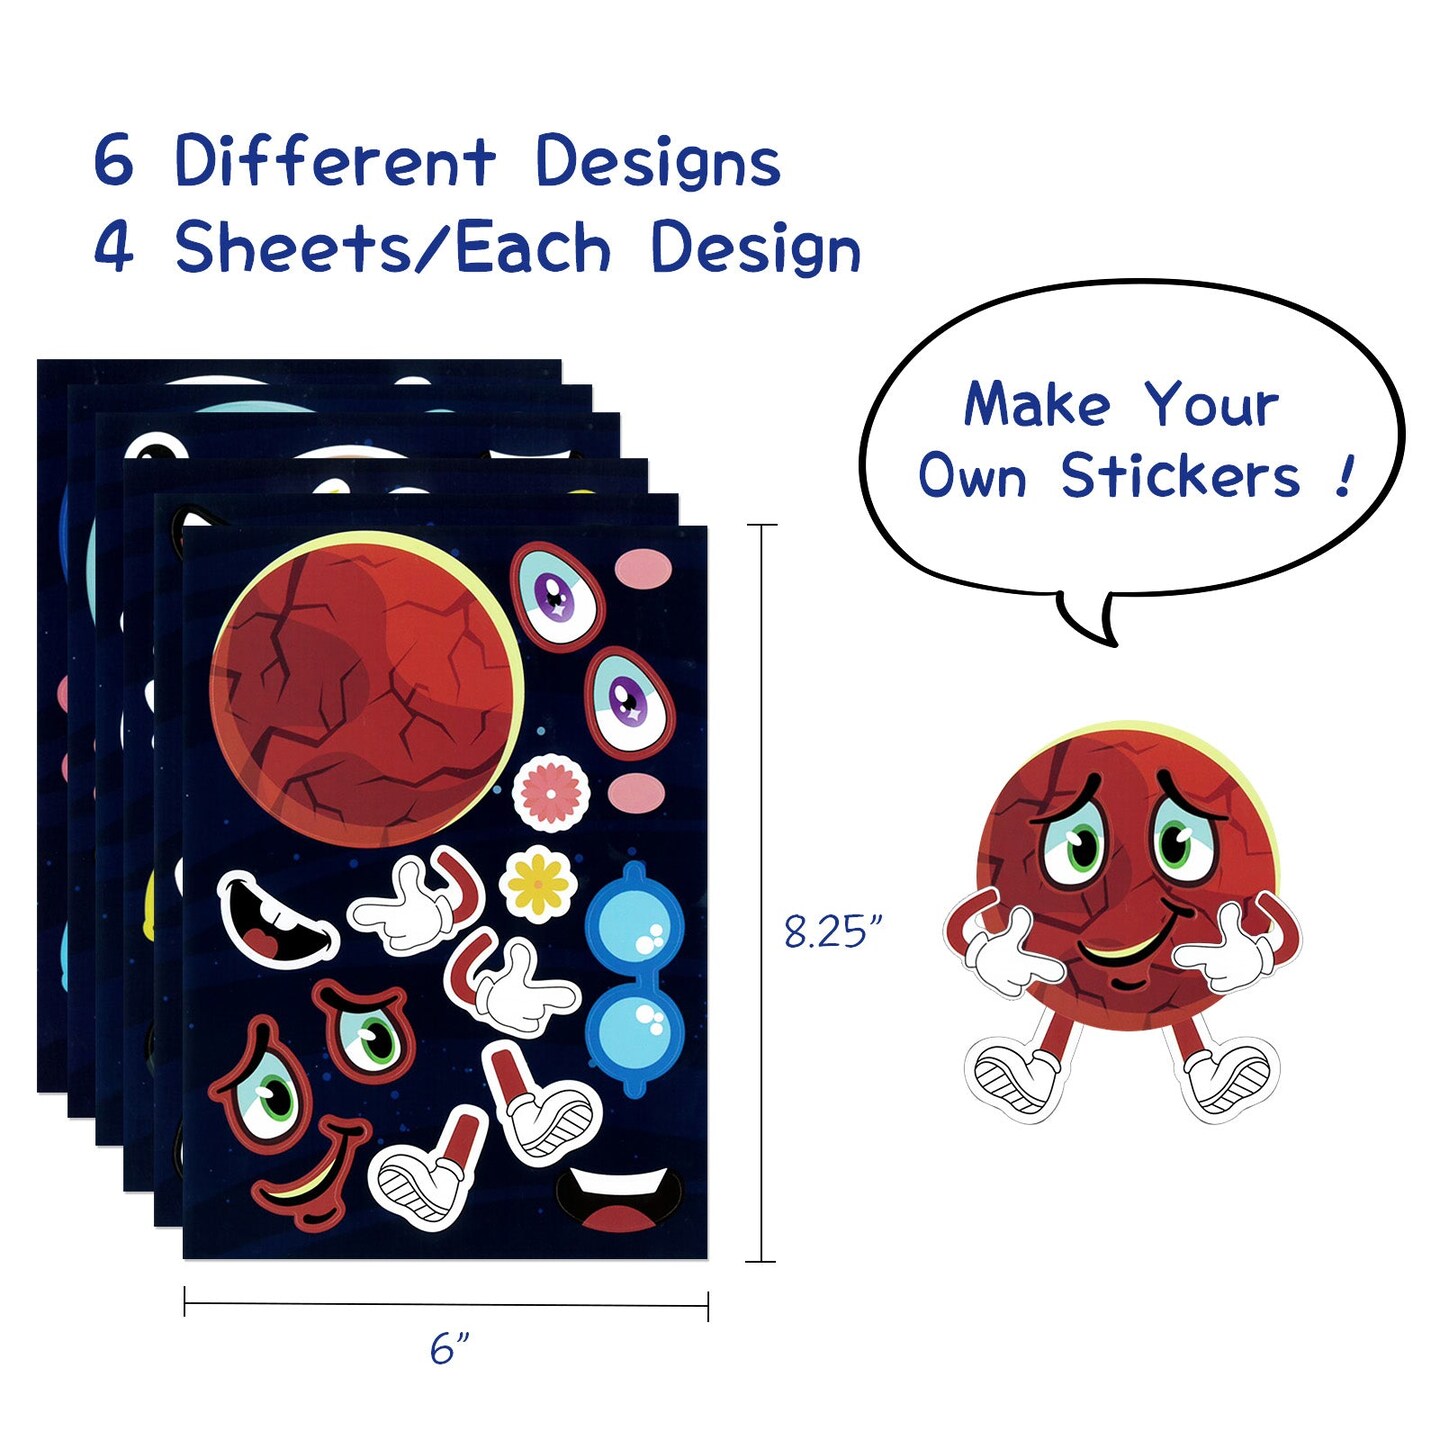 Wrapables Make Your Own Sticker Sheets, DIY Make A Face Animal, Food, Party Favor Stickers (24 Sheets) Cupcakes